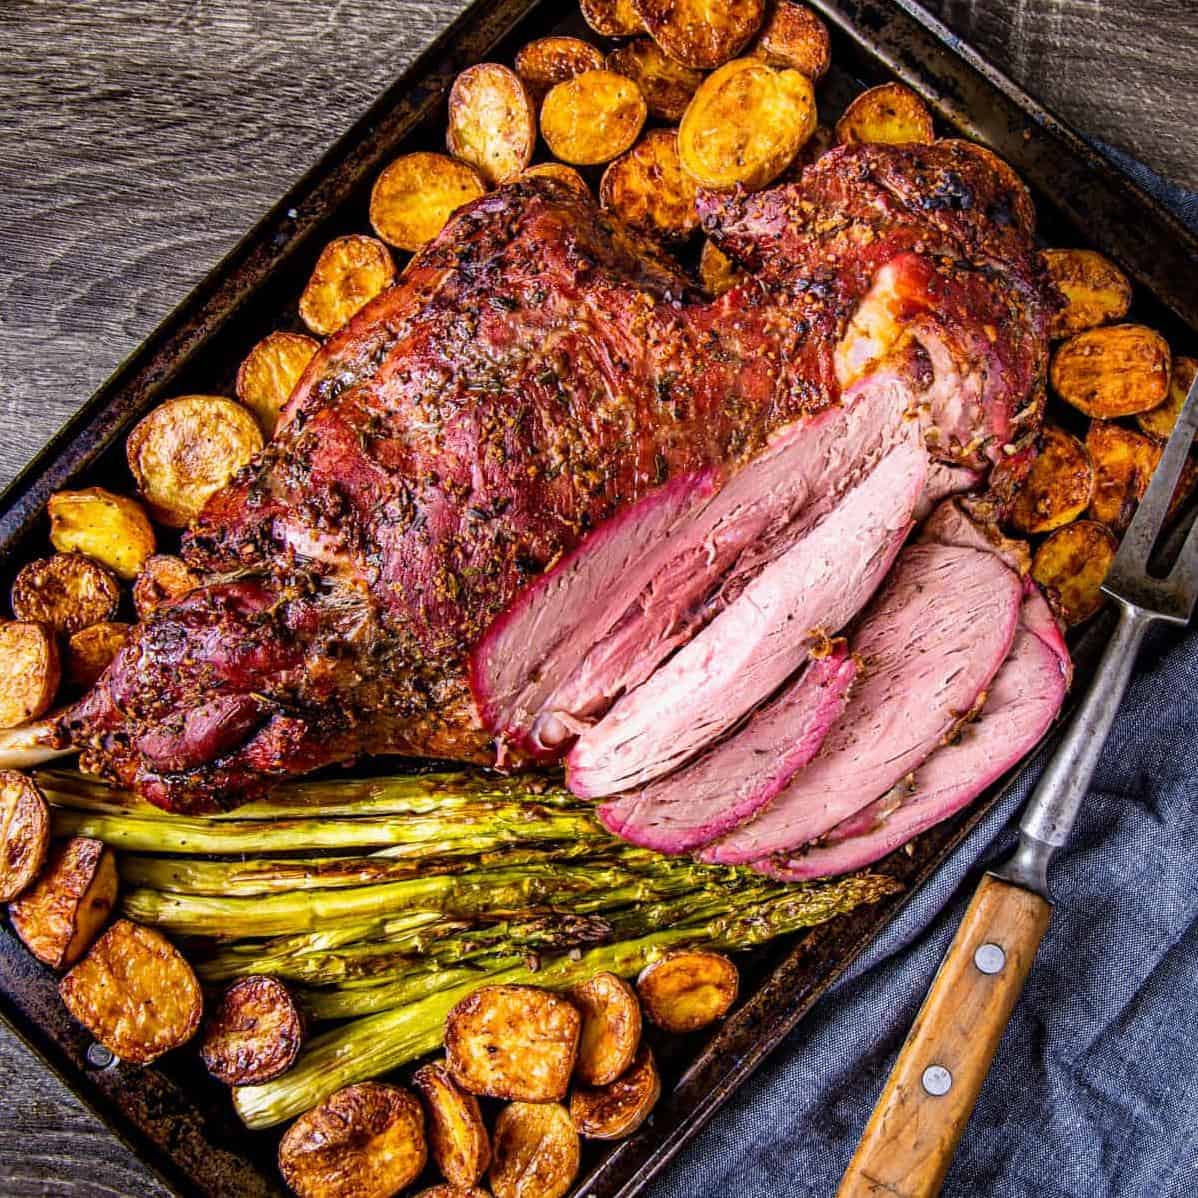  Savory smoked lamb roast, without the need for a smoker!